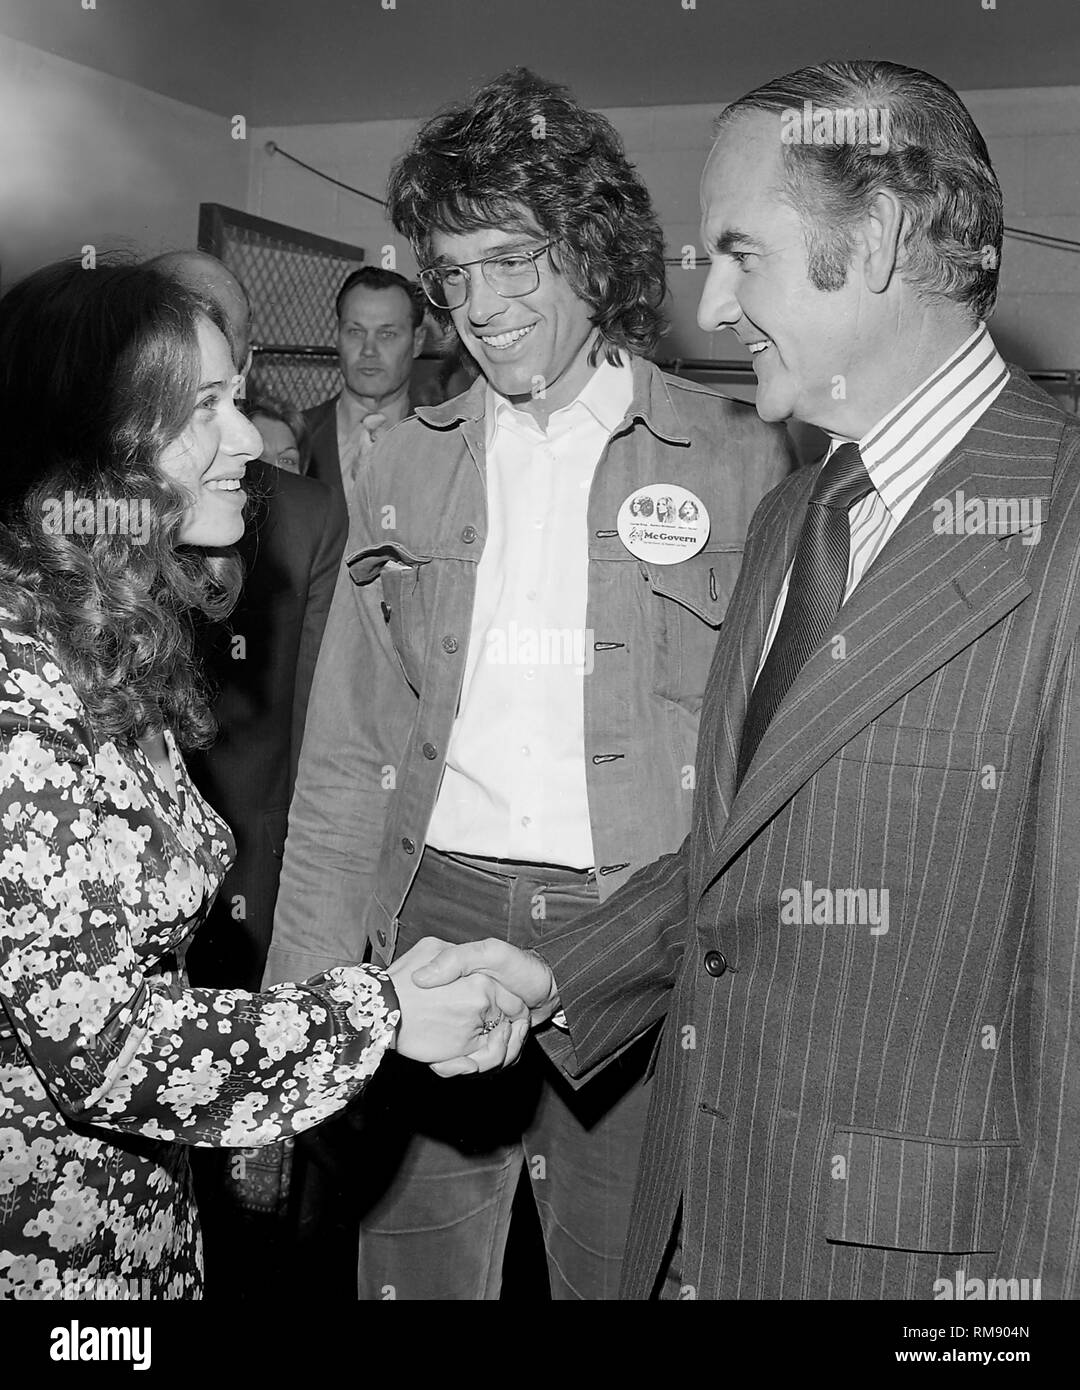 Singer Carole King greets presidential candidate George McGovern before a fundraising concert in April 15, 1972 at The Forum in Los Angeles featuring James Taylor, Carole KIng, Barbra Streisand and Quincy Jones. Stock Photo